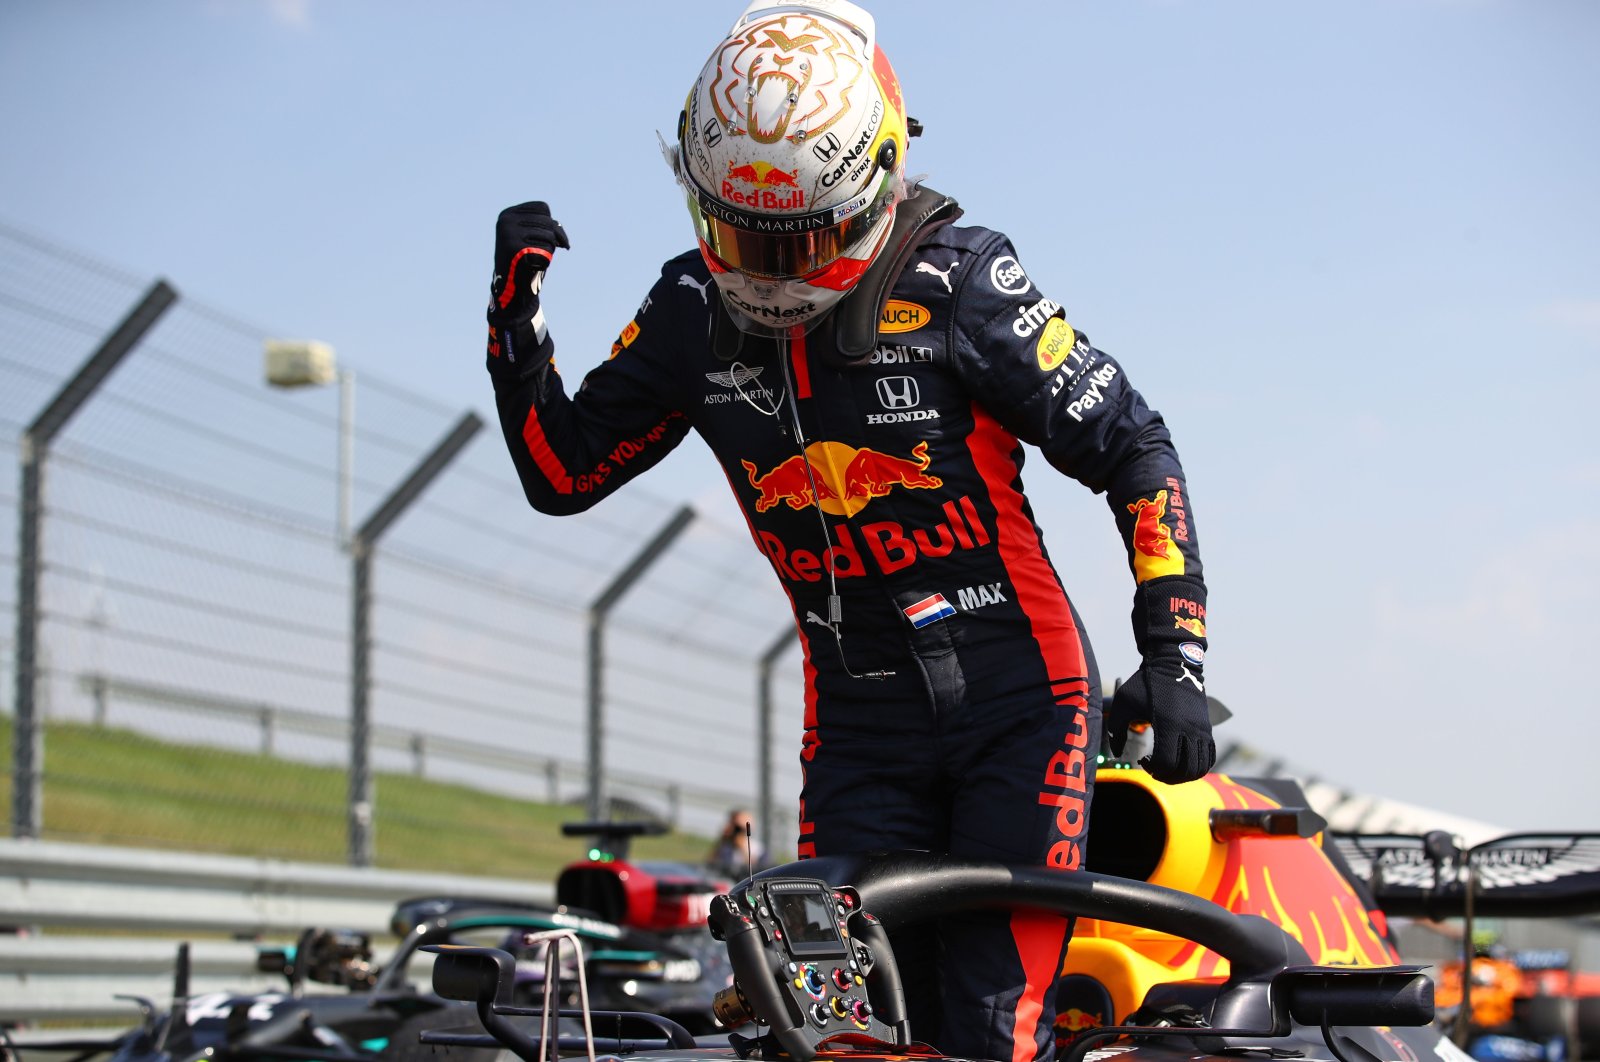 Verstappen hopes for repeated success to pile pressure on Hamilton